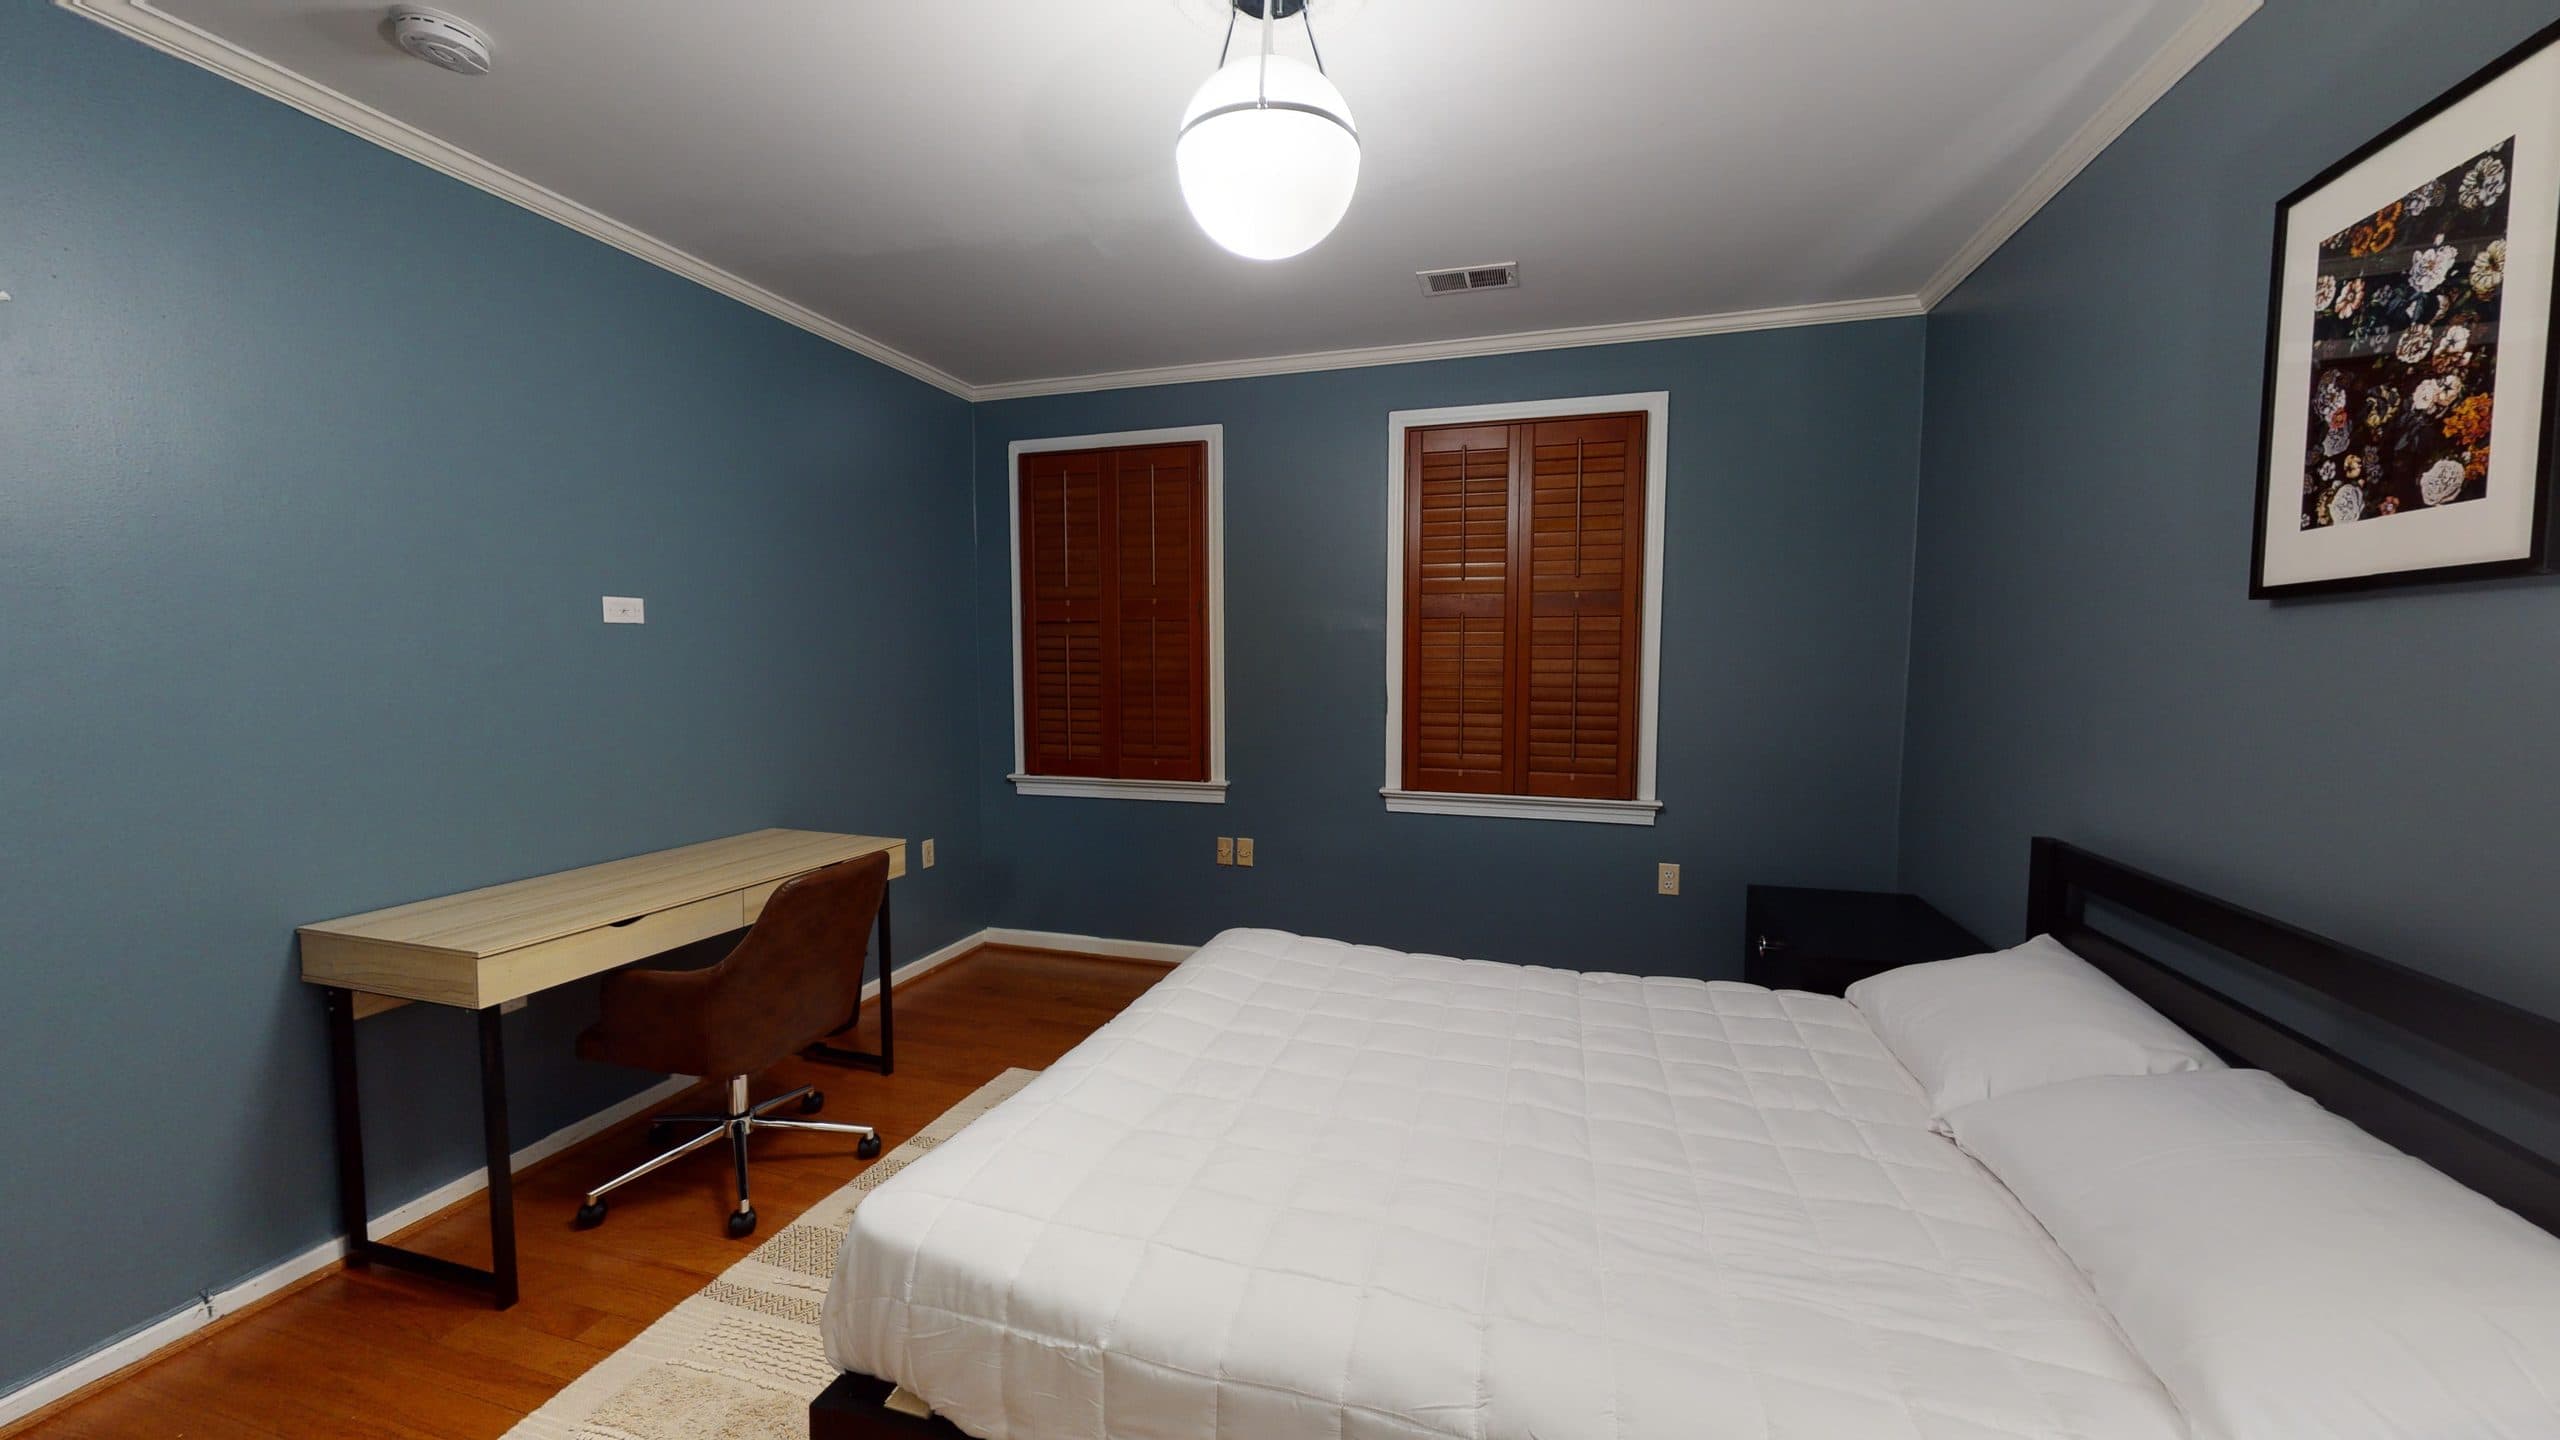 Photo 3 of #1430: Queen Bedroom 1A at June Homes